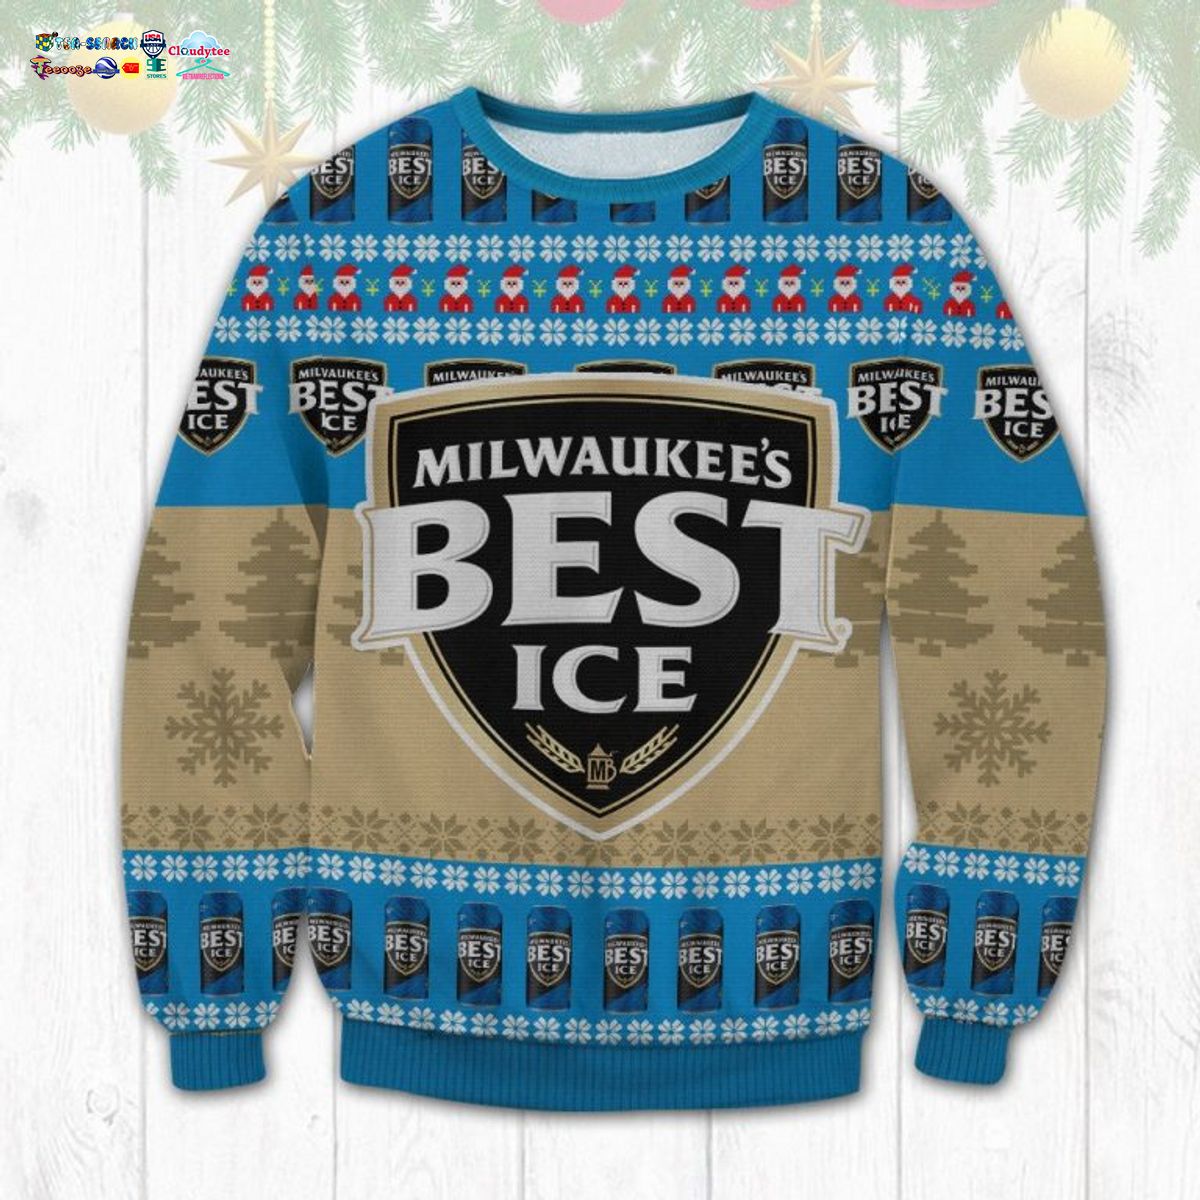 Milwaukee's Best Ice Ver 2 Ugly Christmas Sweater - Hey! You look amazing dear